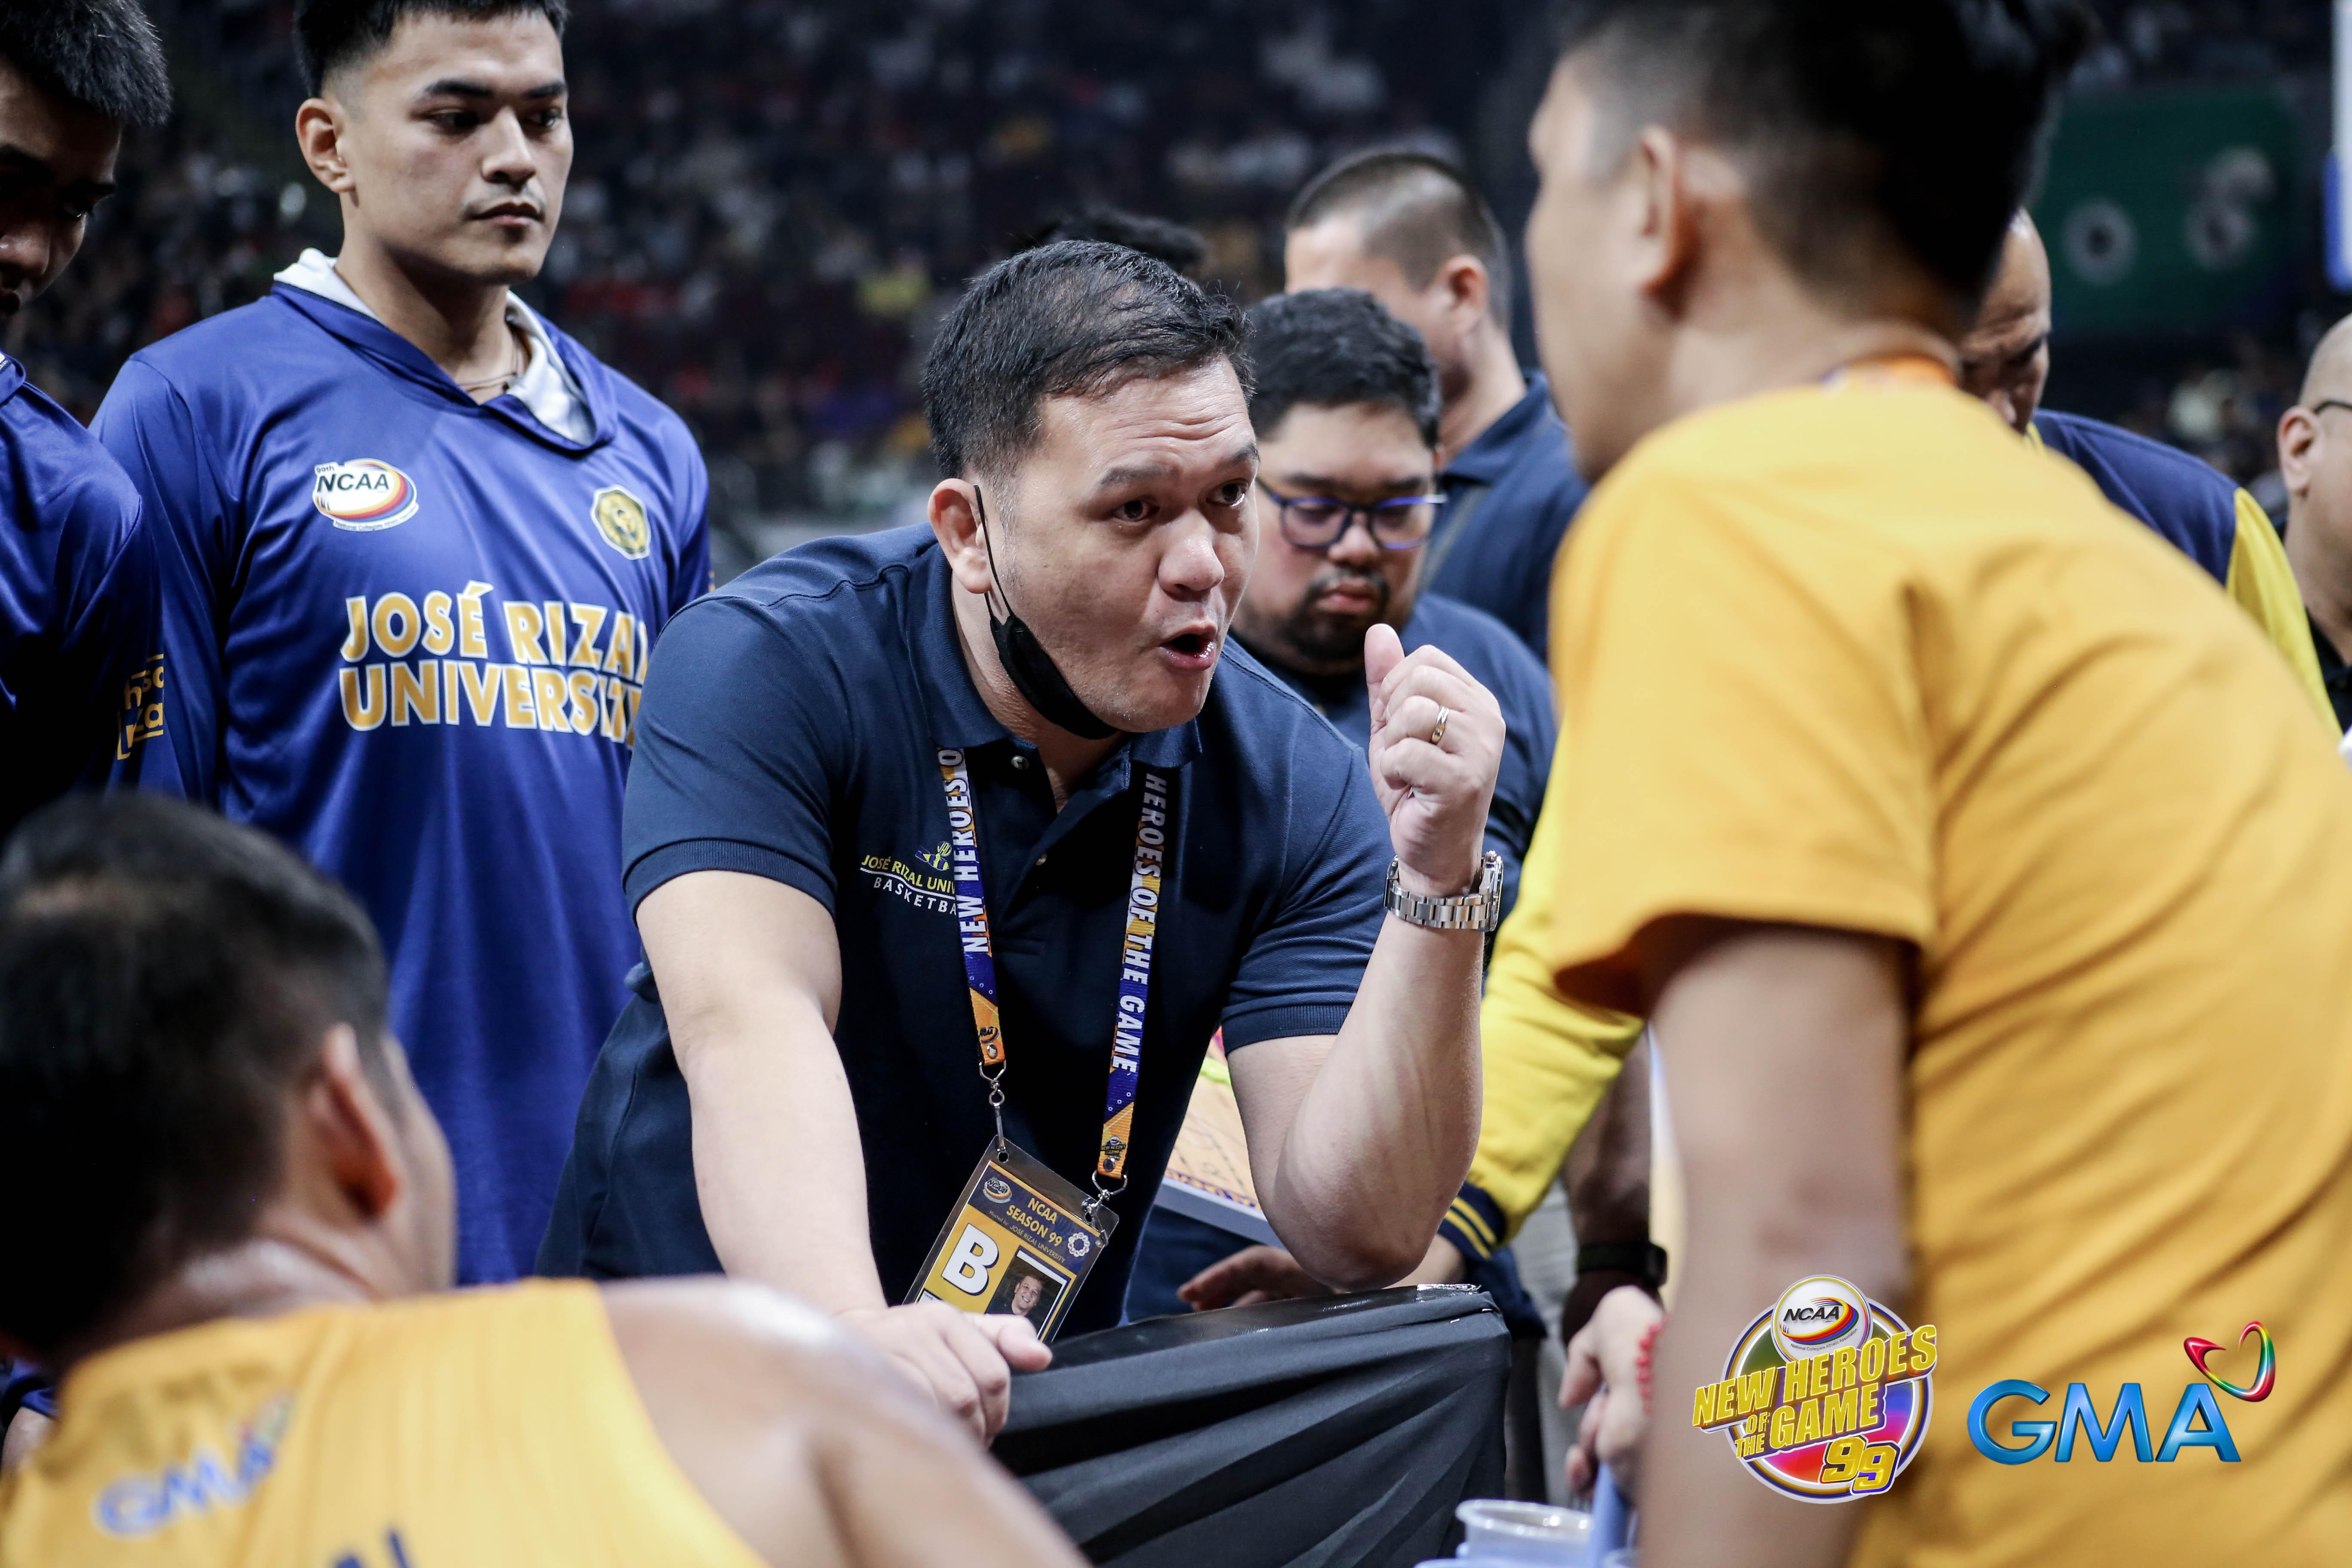 Louie Gonzales asserts JRU 'plays physical, not dirty' after withdrawal of Delos Santos suspension thumbnail